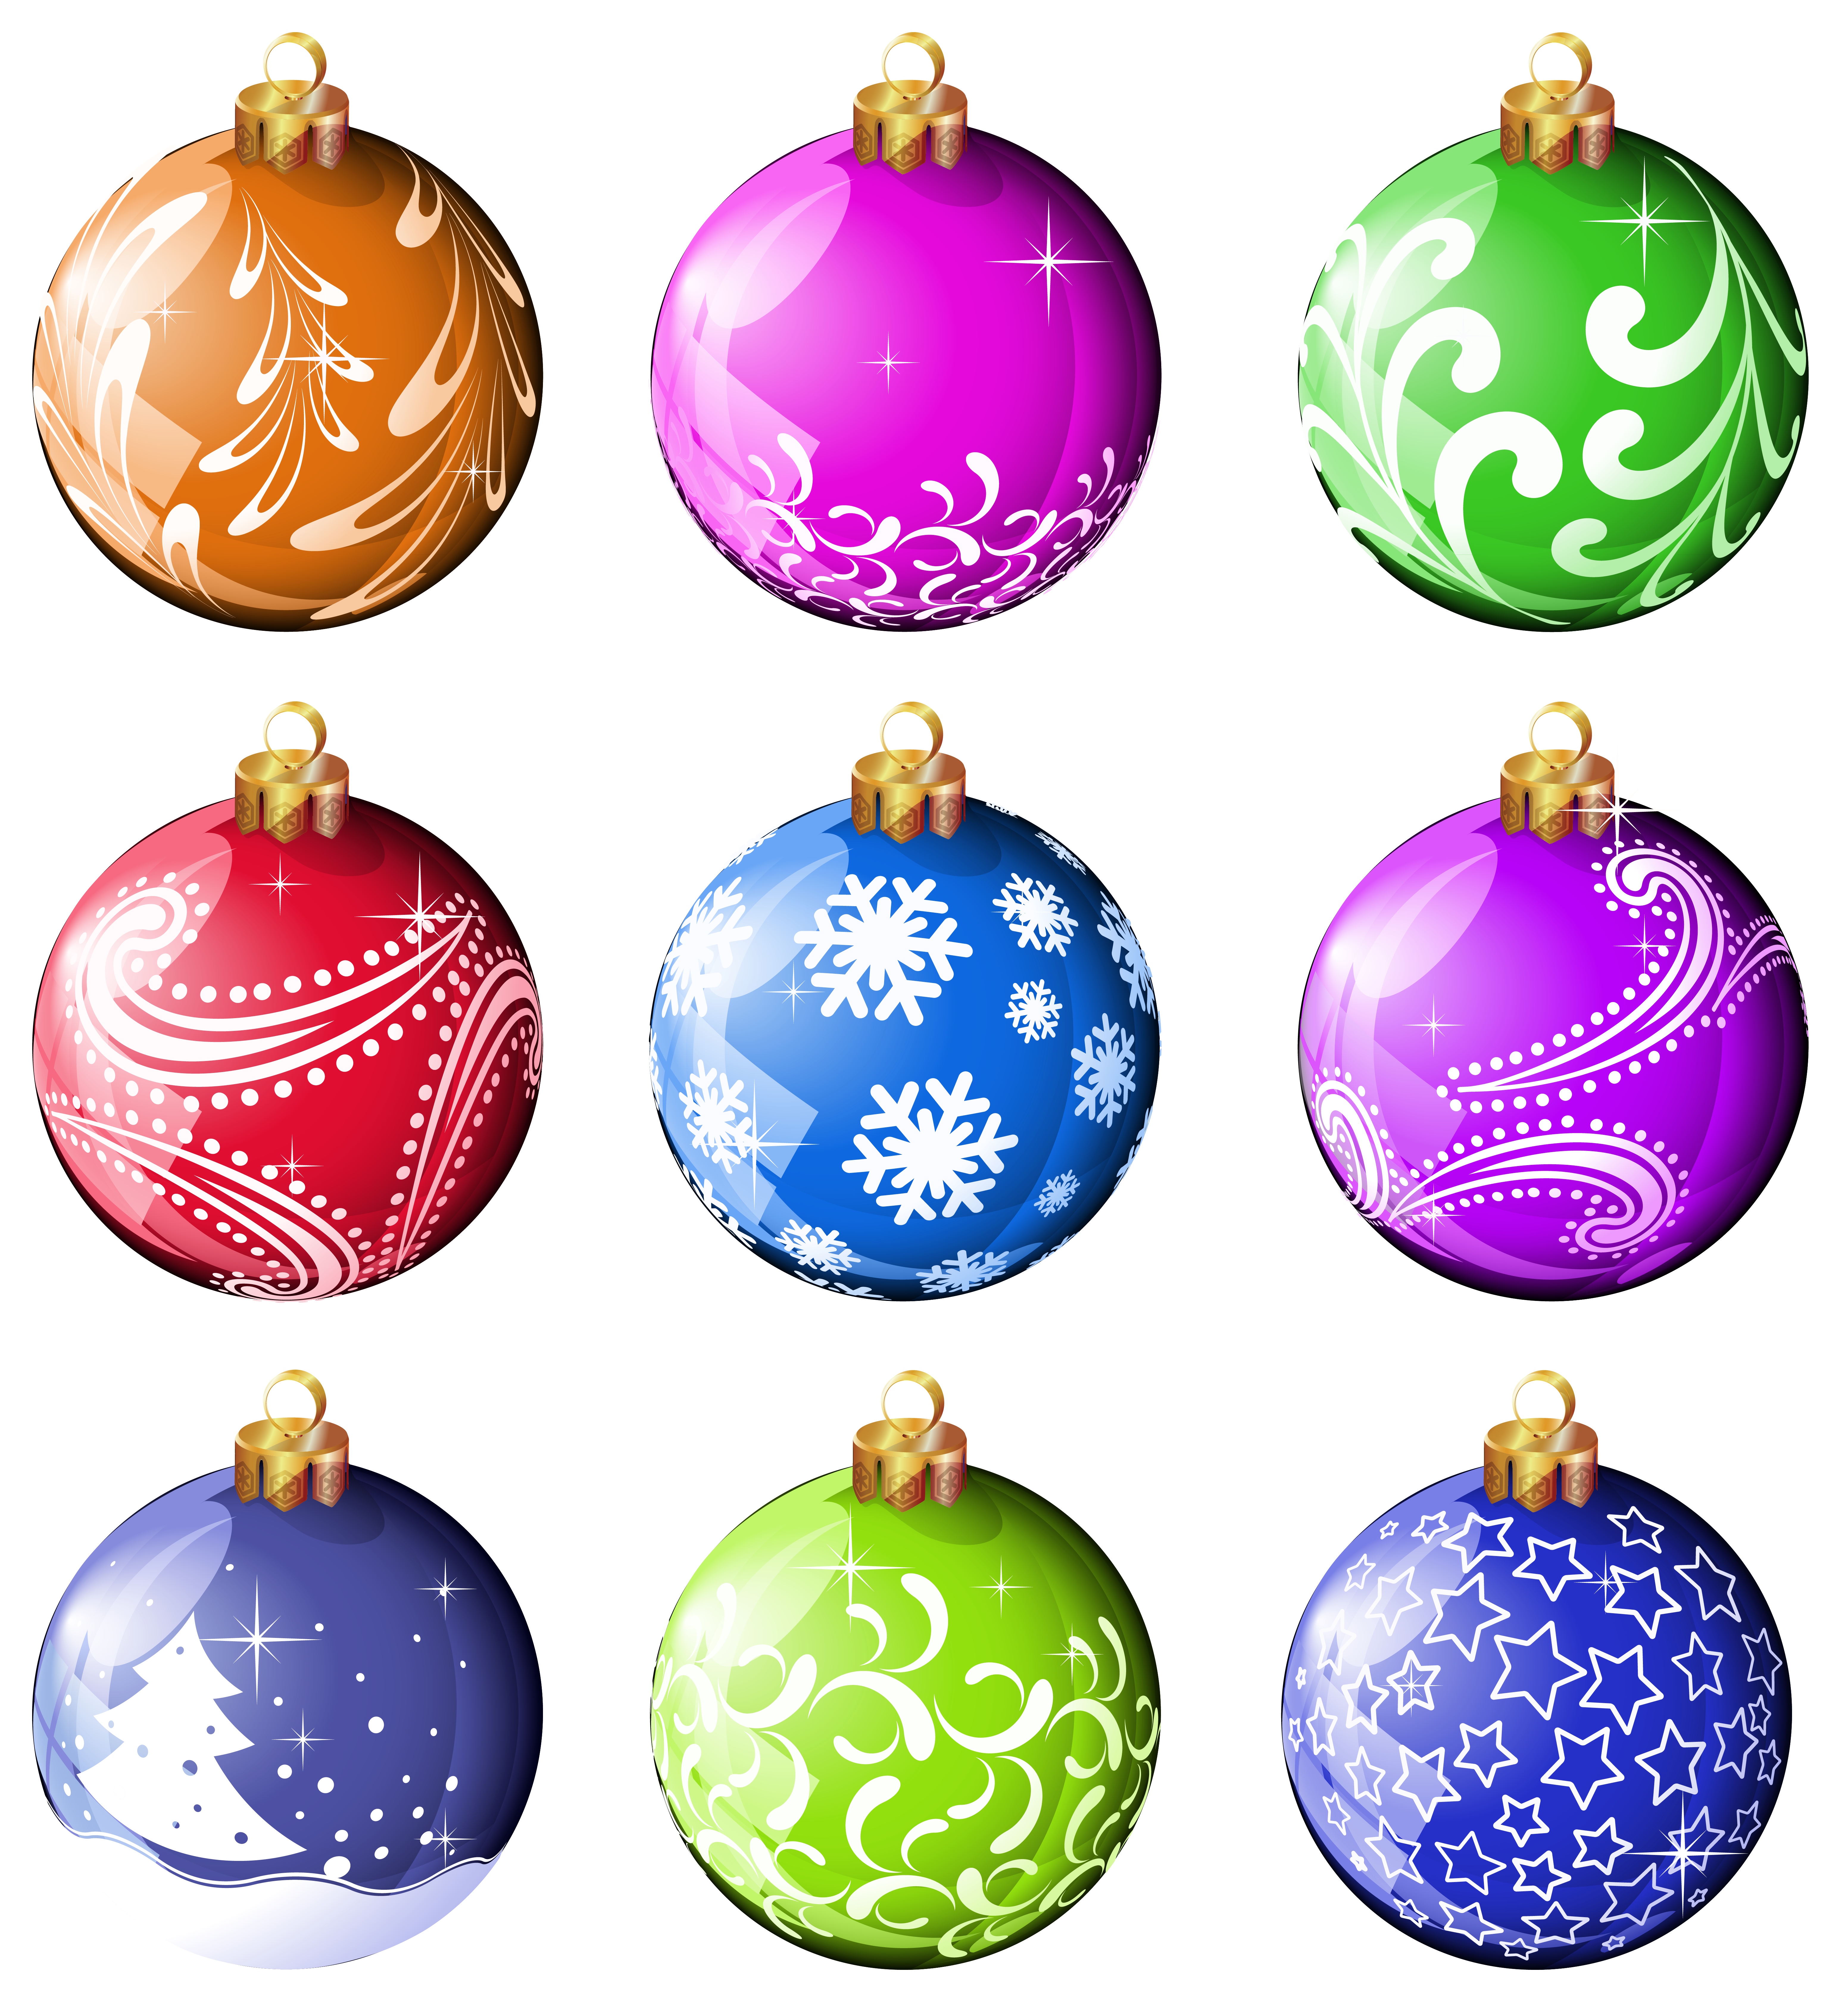 Free Christmas Ornament Images, Download Free Christmas Ornament Images